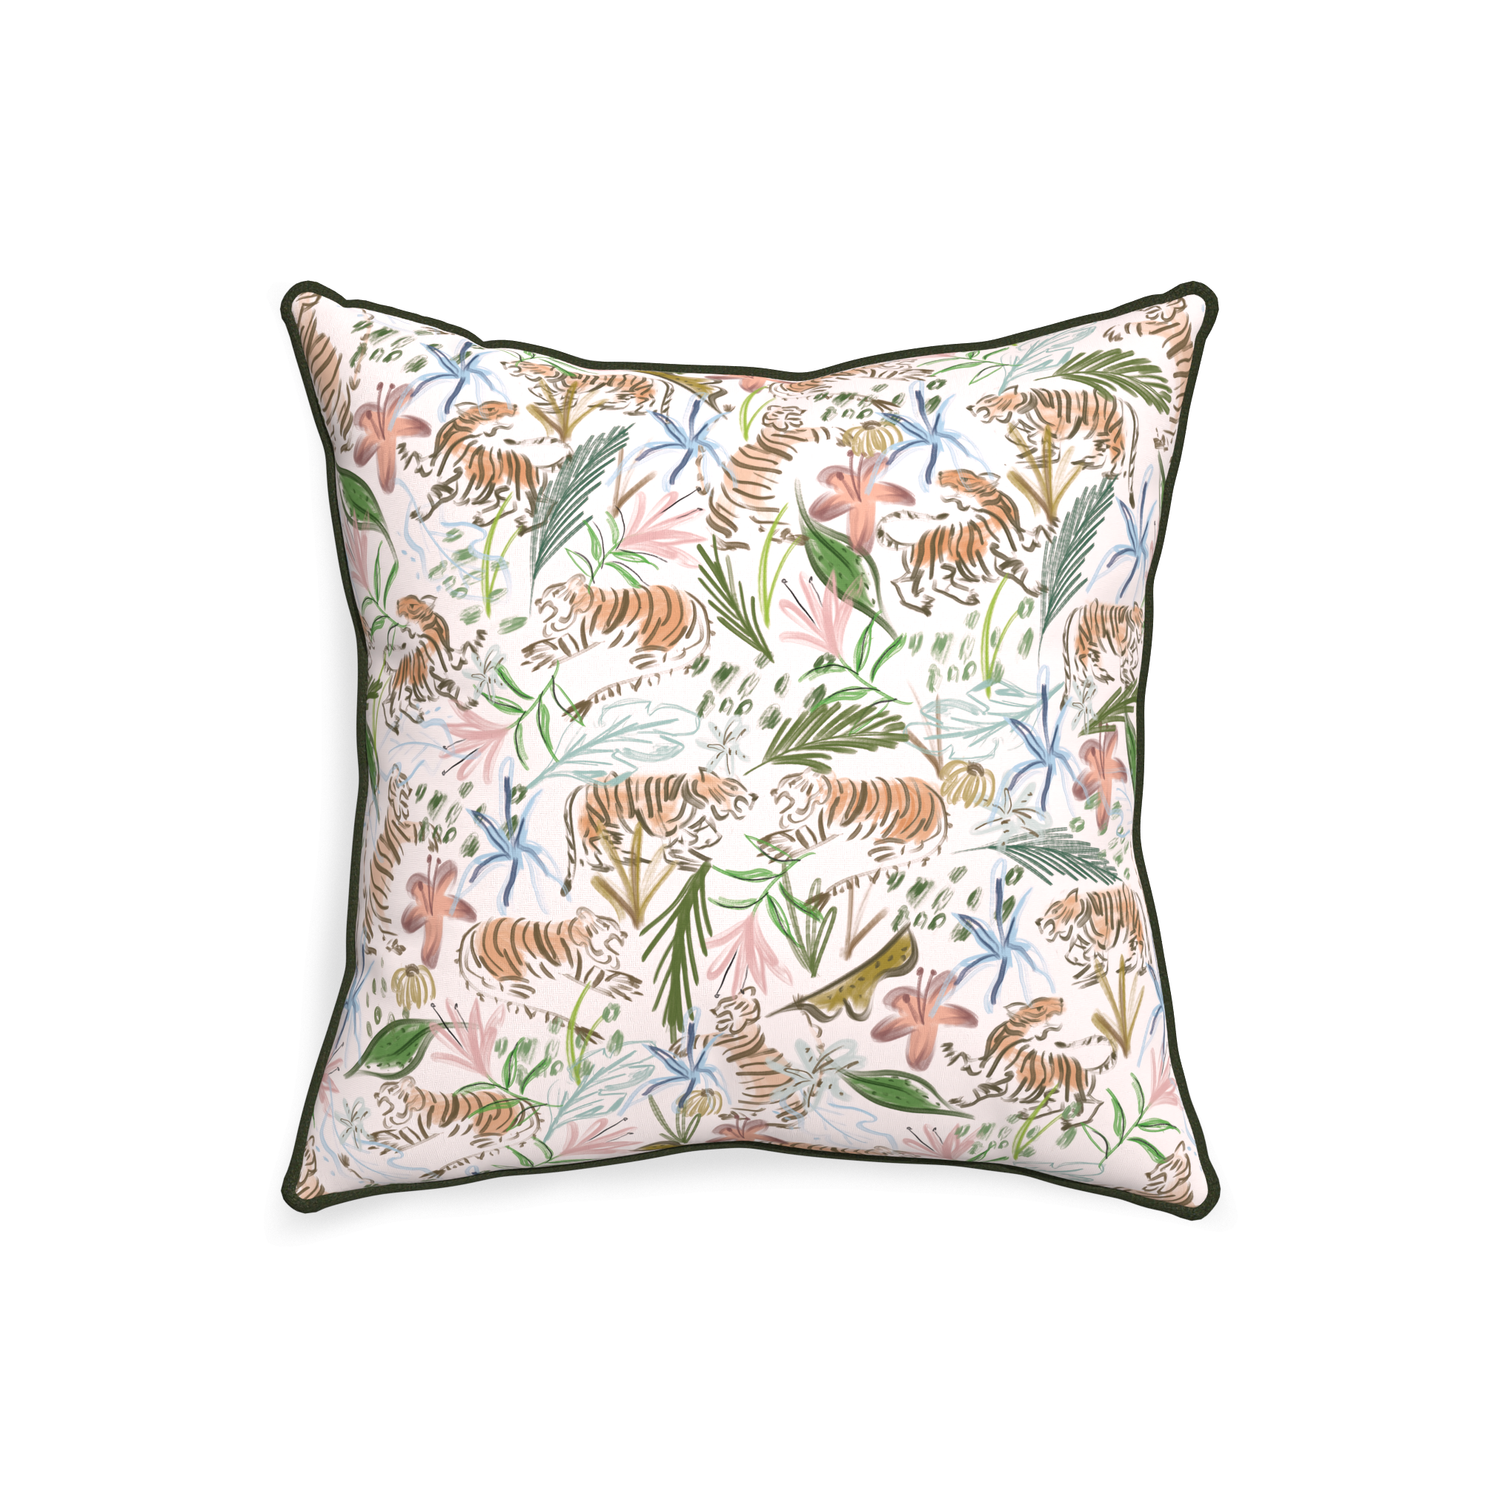 20-square frida pink custom pink chinoiserie tigerpillow with f piping on white background